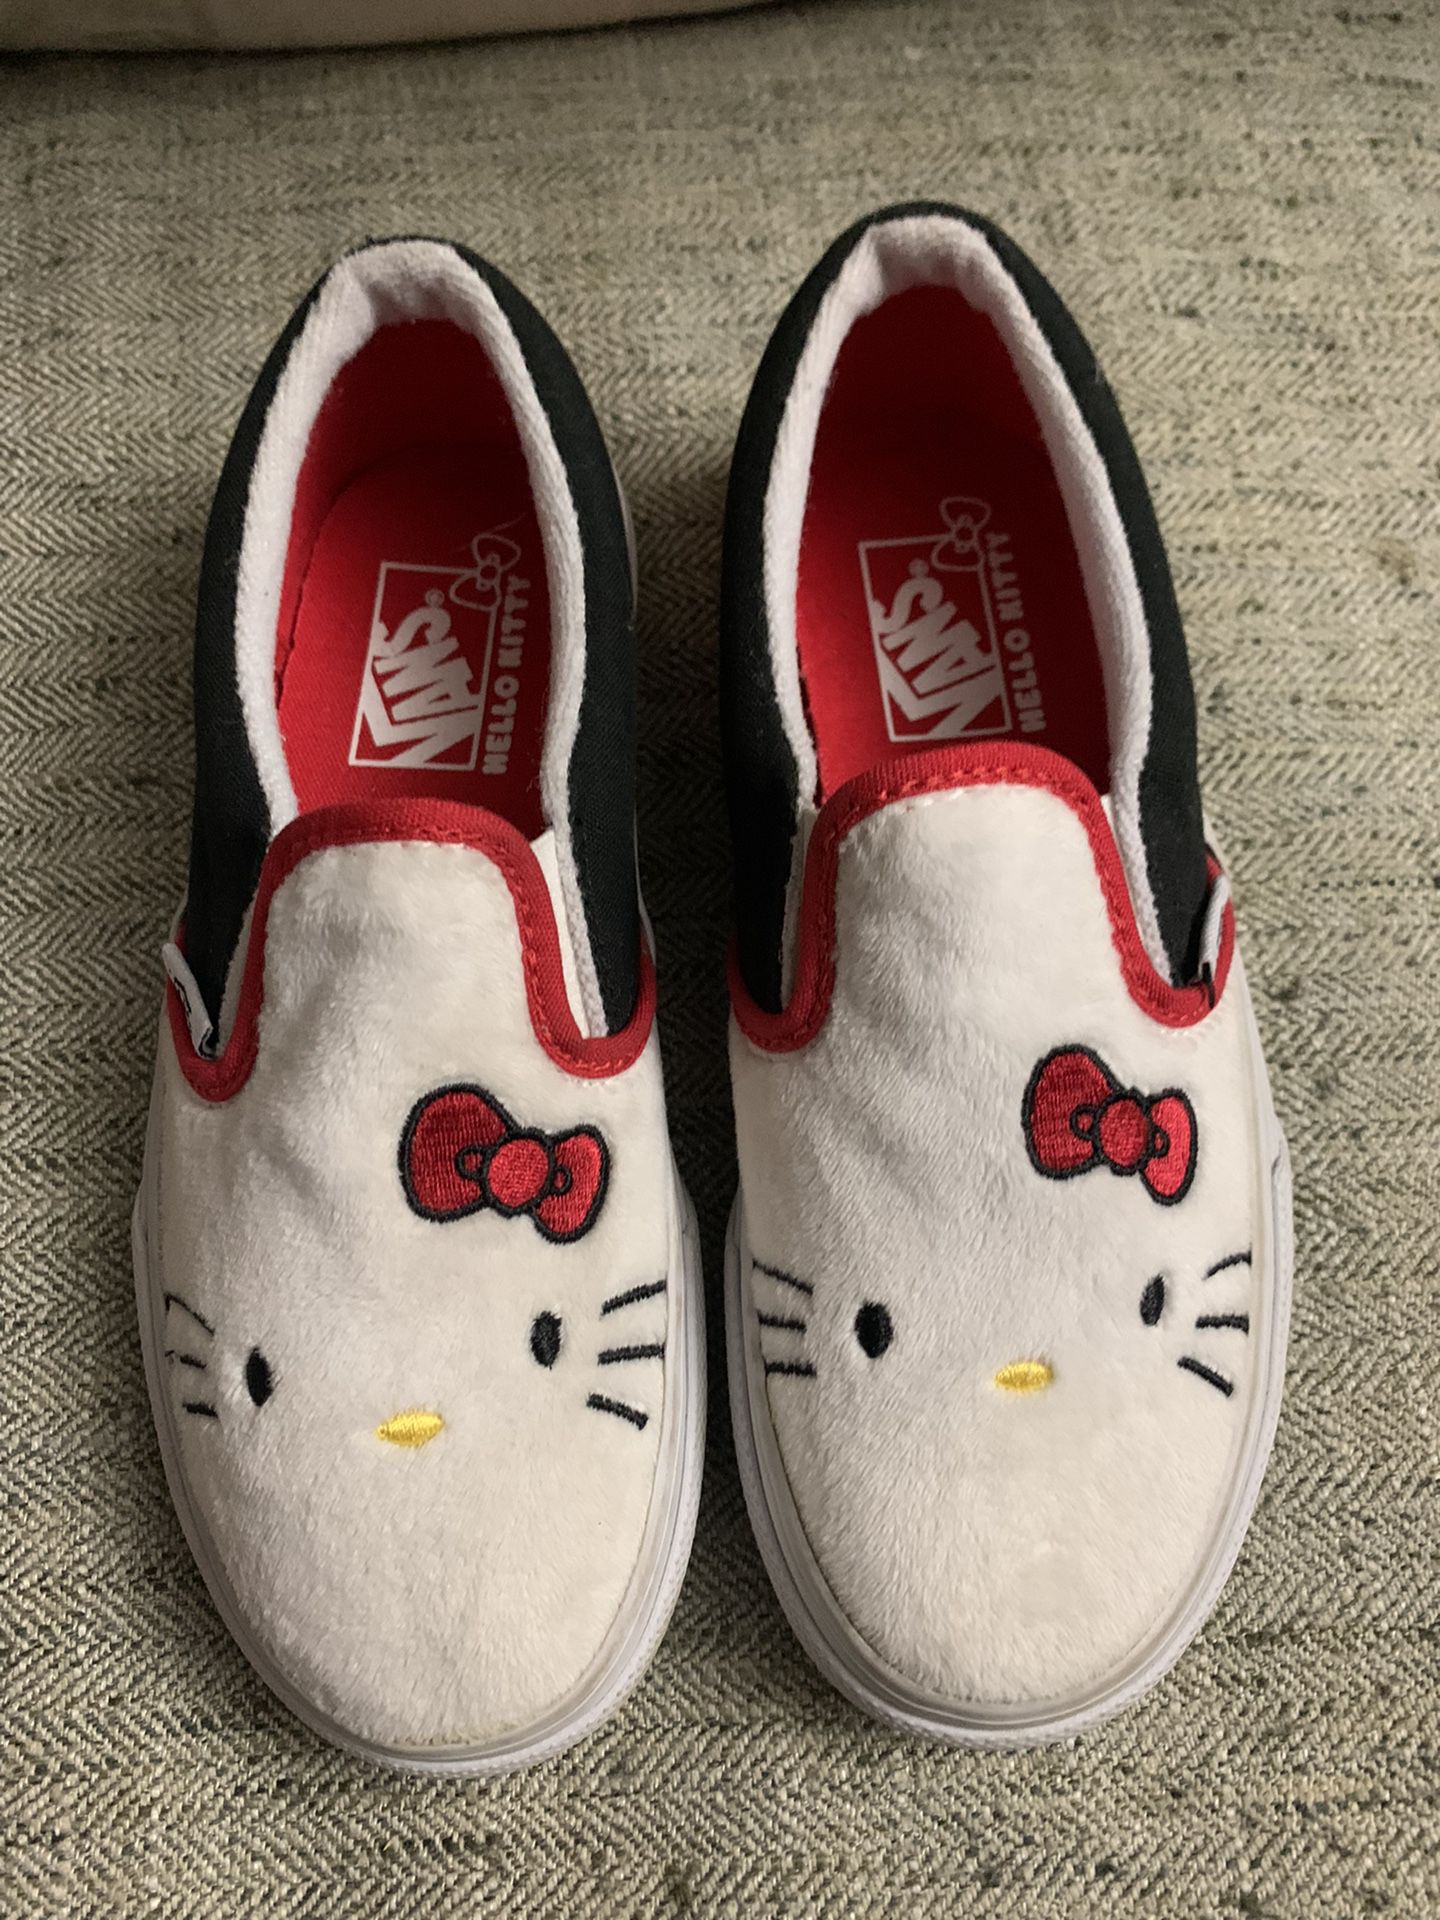 Girls 5/6 Clothes And Hello Kitty Vans Size 13